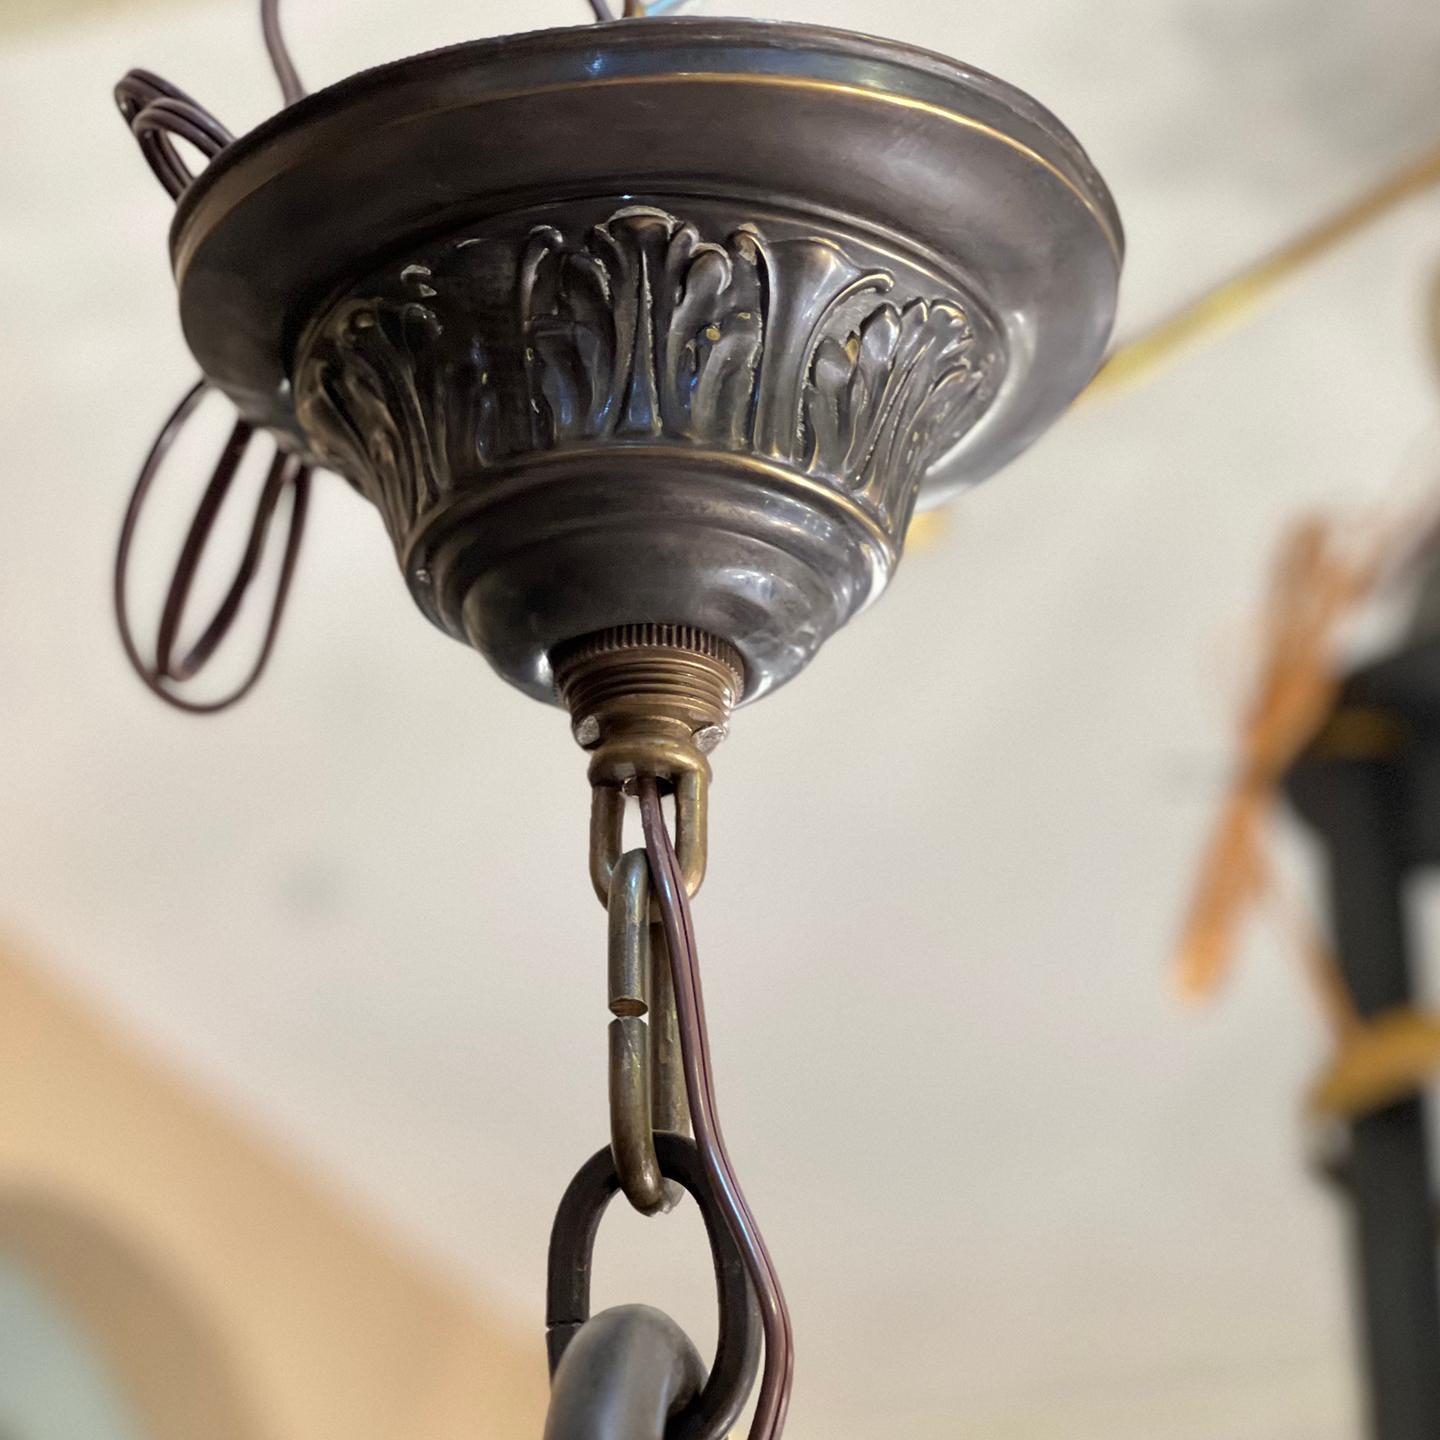 Circa 1900's English bronze chandelier with 6 etched glass globes and interior lights.

Measurements:
Height: 37